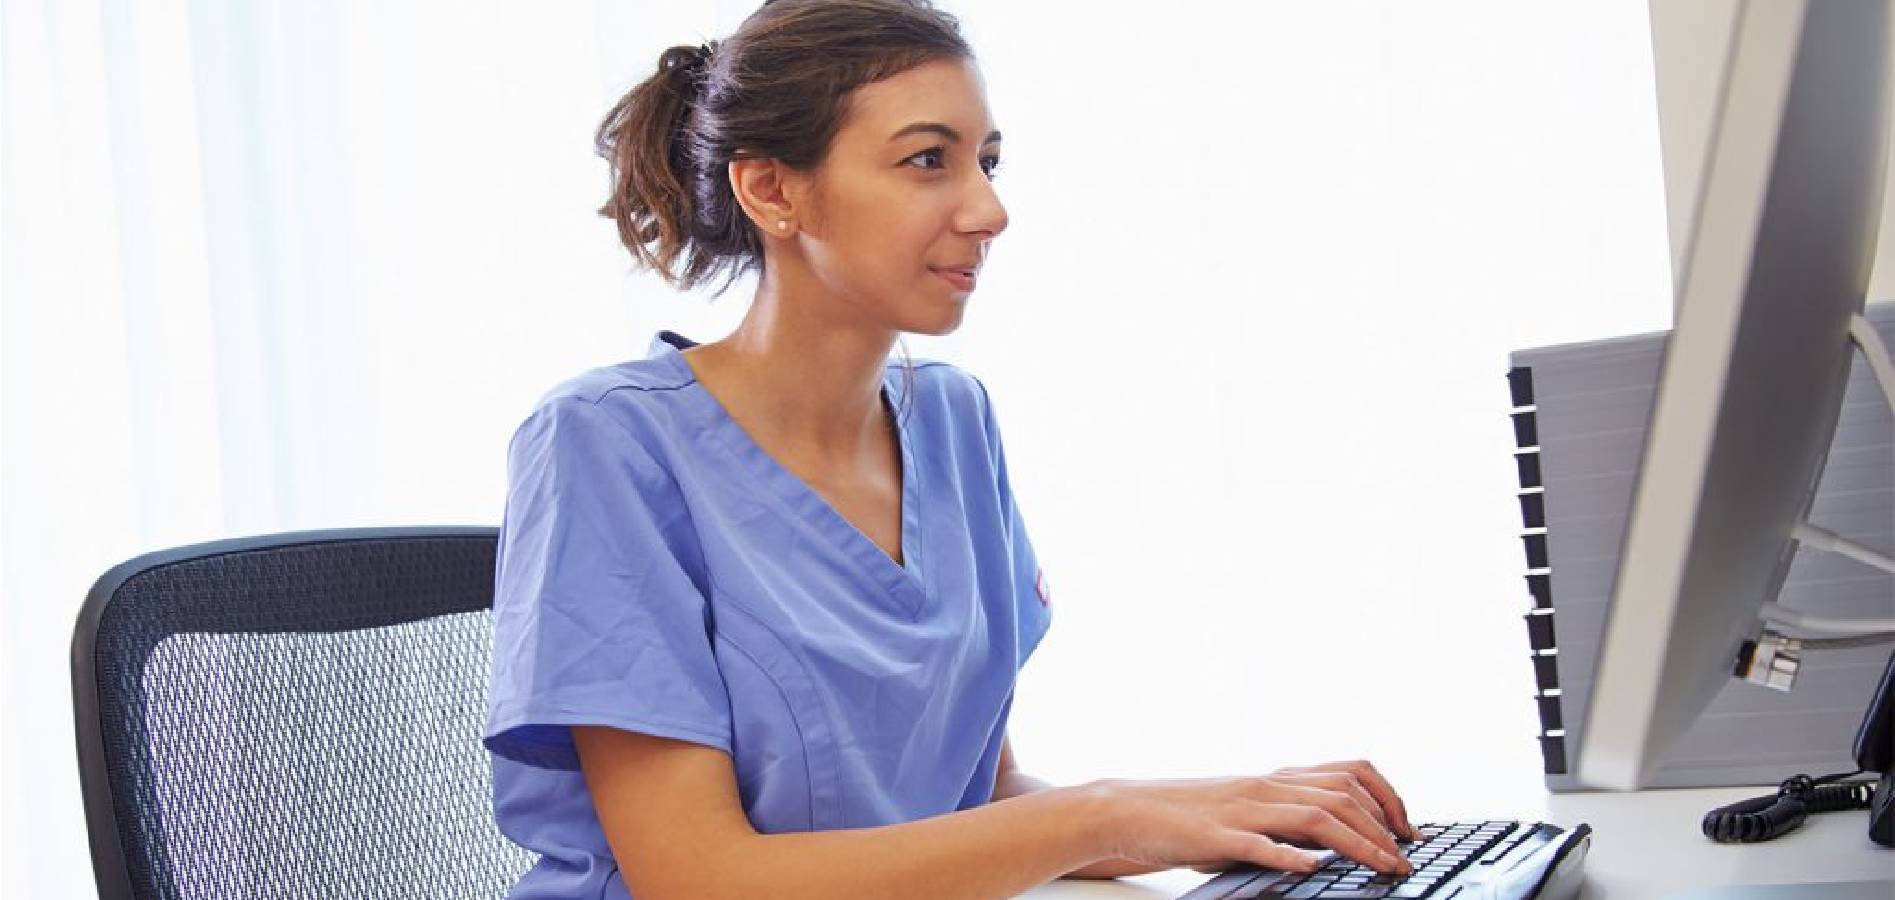 vet tech smiling while looking at her computer online